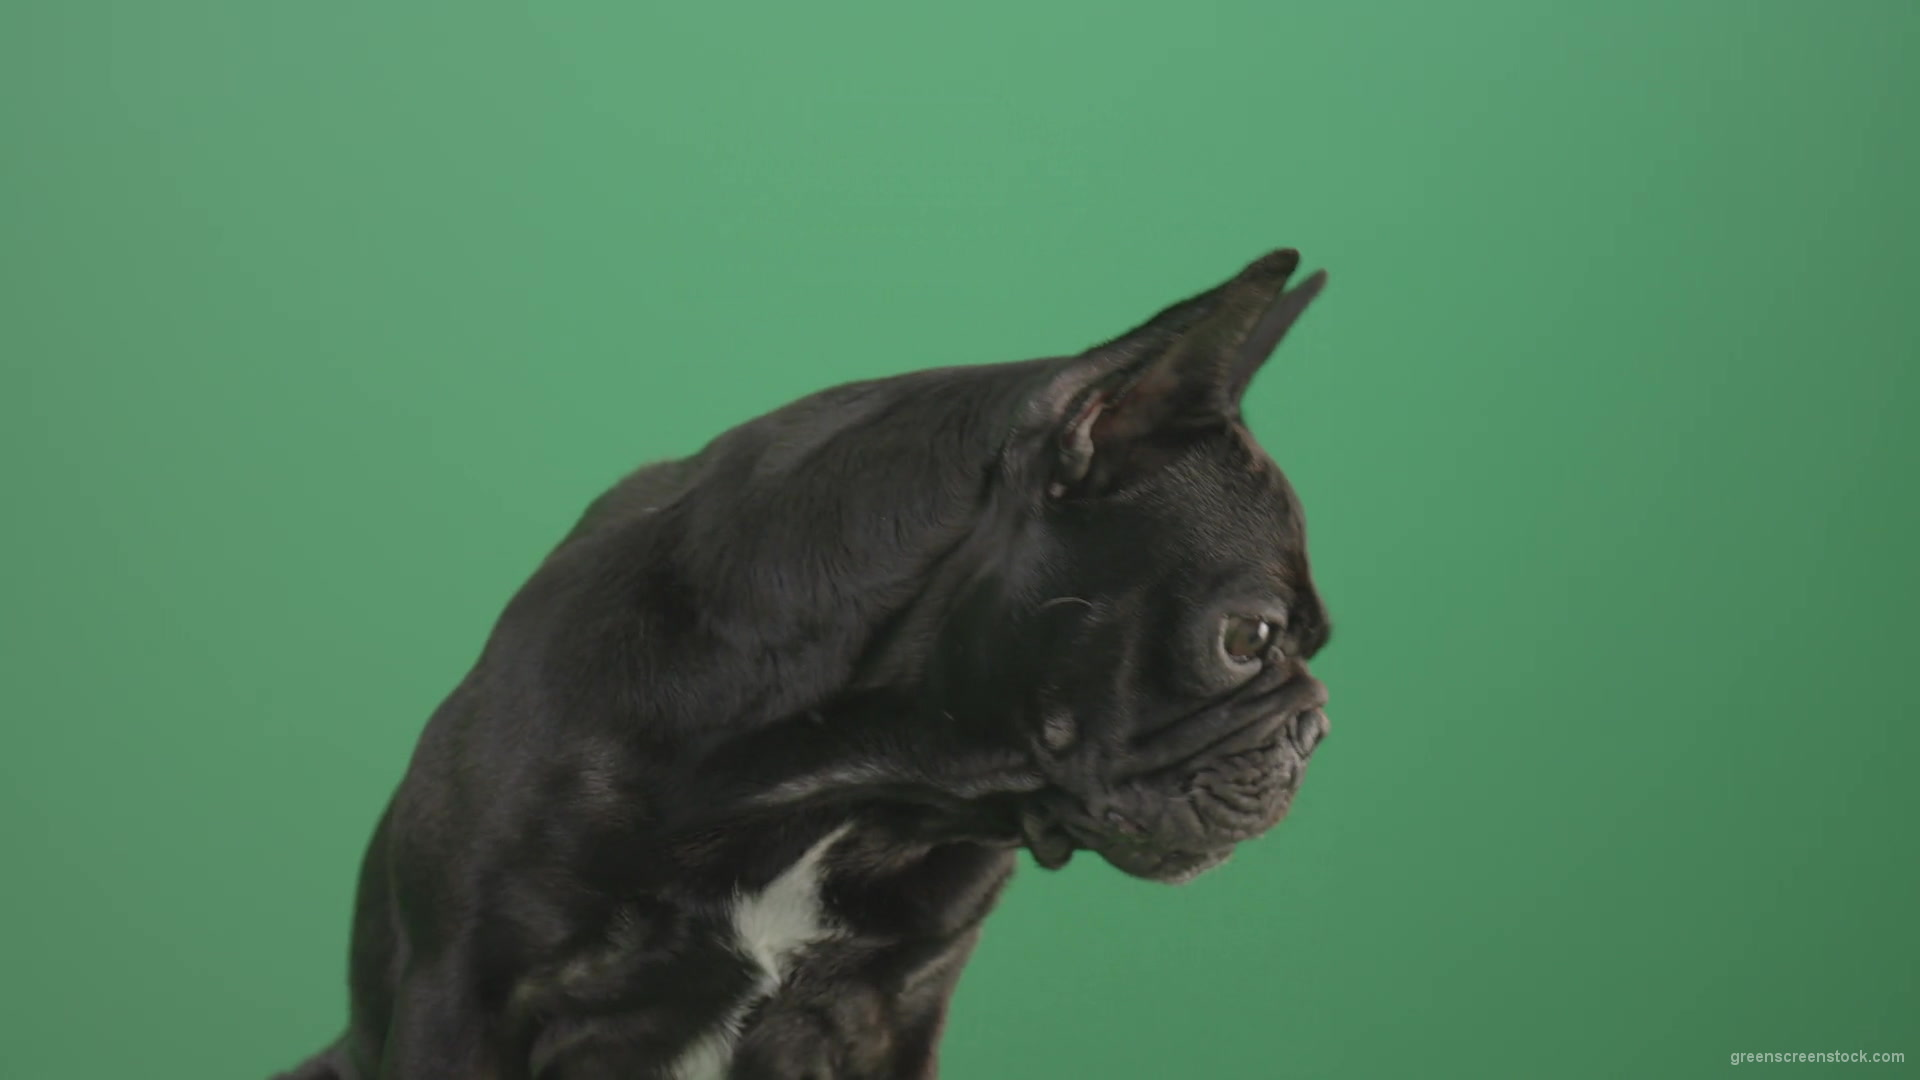 Face-portrait-of-scared-french-bulldog-toy-dog-isolated-on-green-screen-1920_008 Green Screen Stock